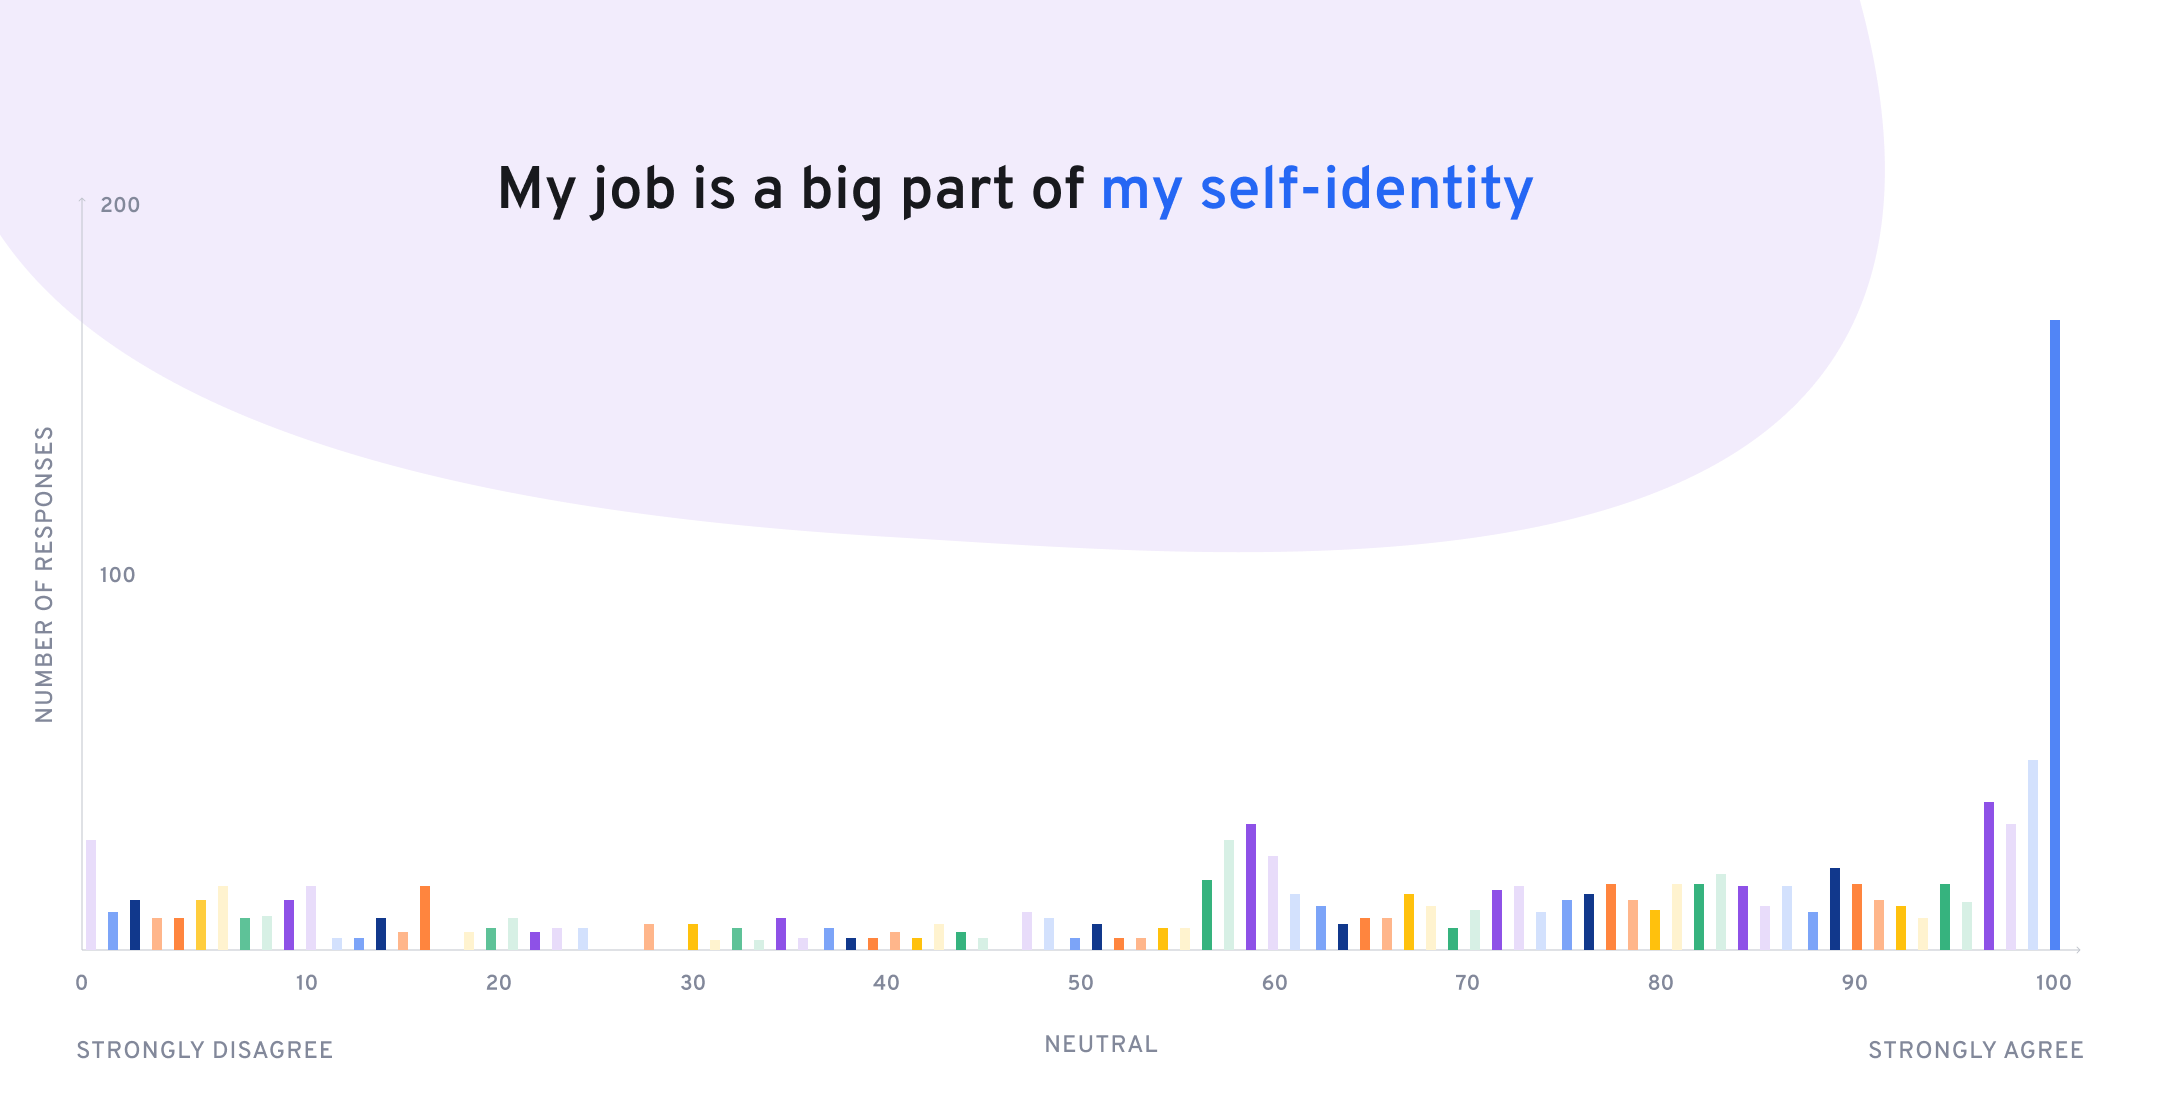 self-identity as your job